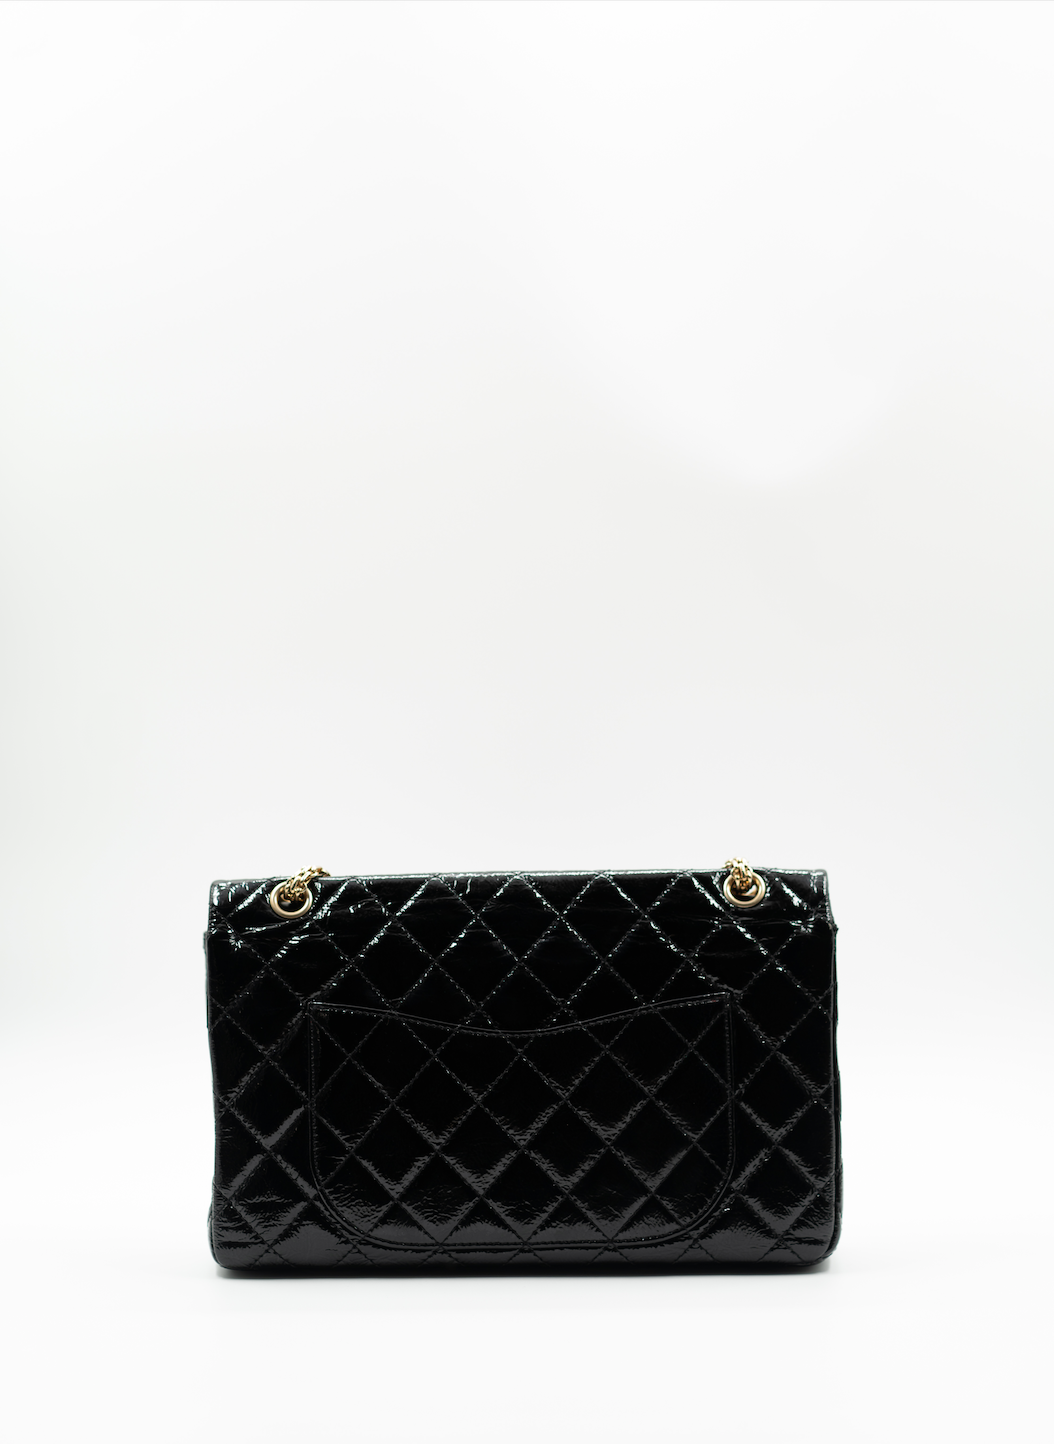 Chanel 2.55 Reissue in black patent leater